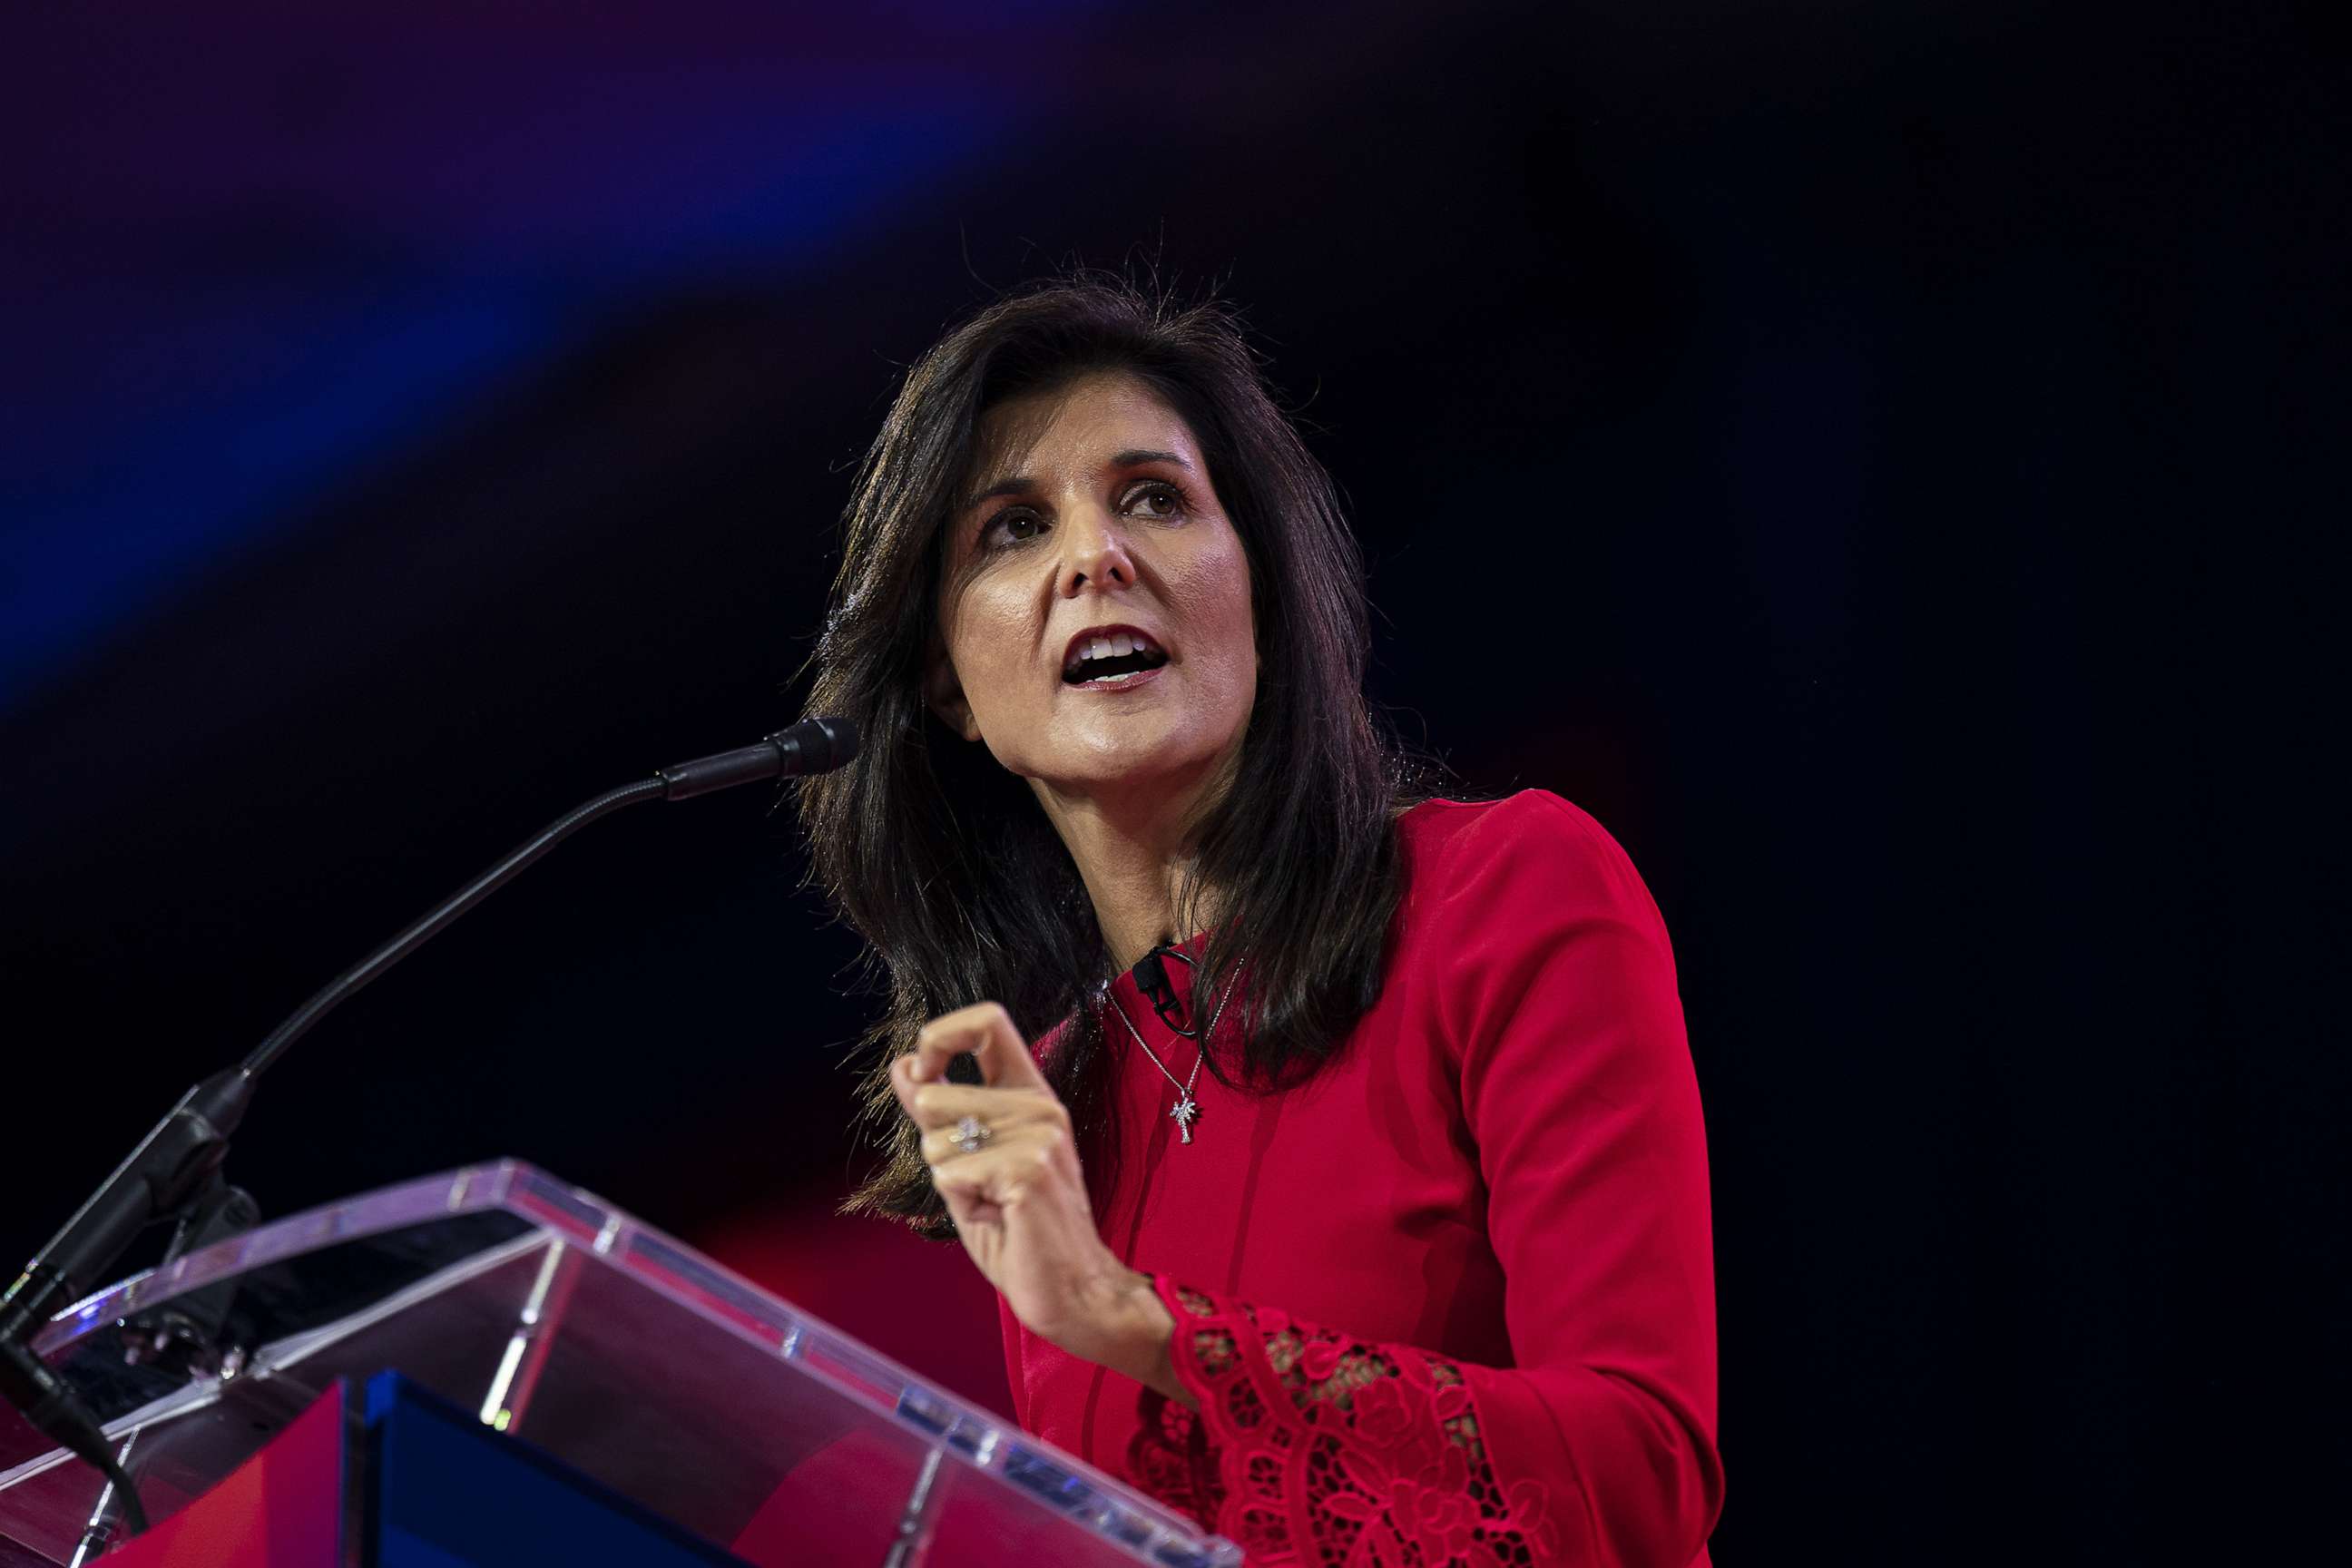 PHOTO: Nikki Haley, former ambassador to the United Nations, speaks during the Conservative Political Action Conference (CPAC), March 3, 2023, in National Harbor, Md.